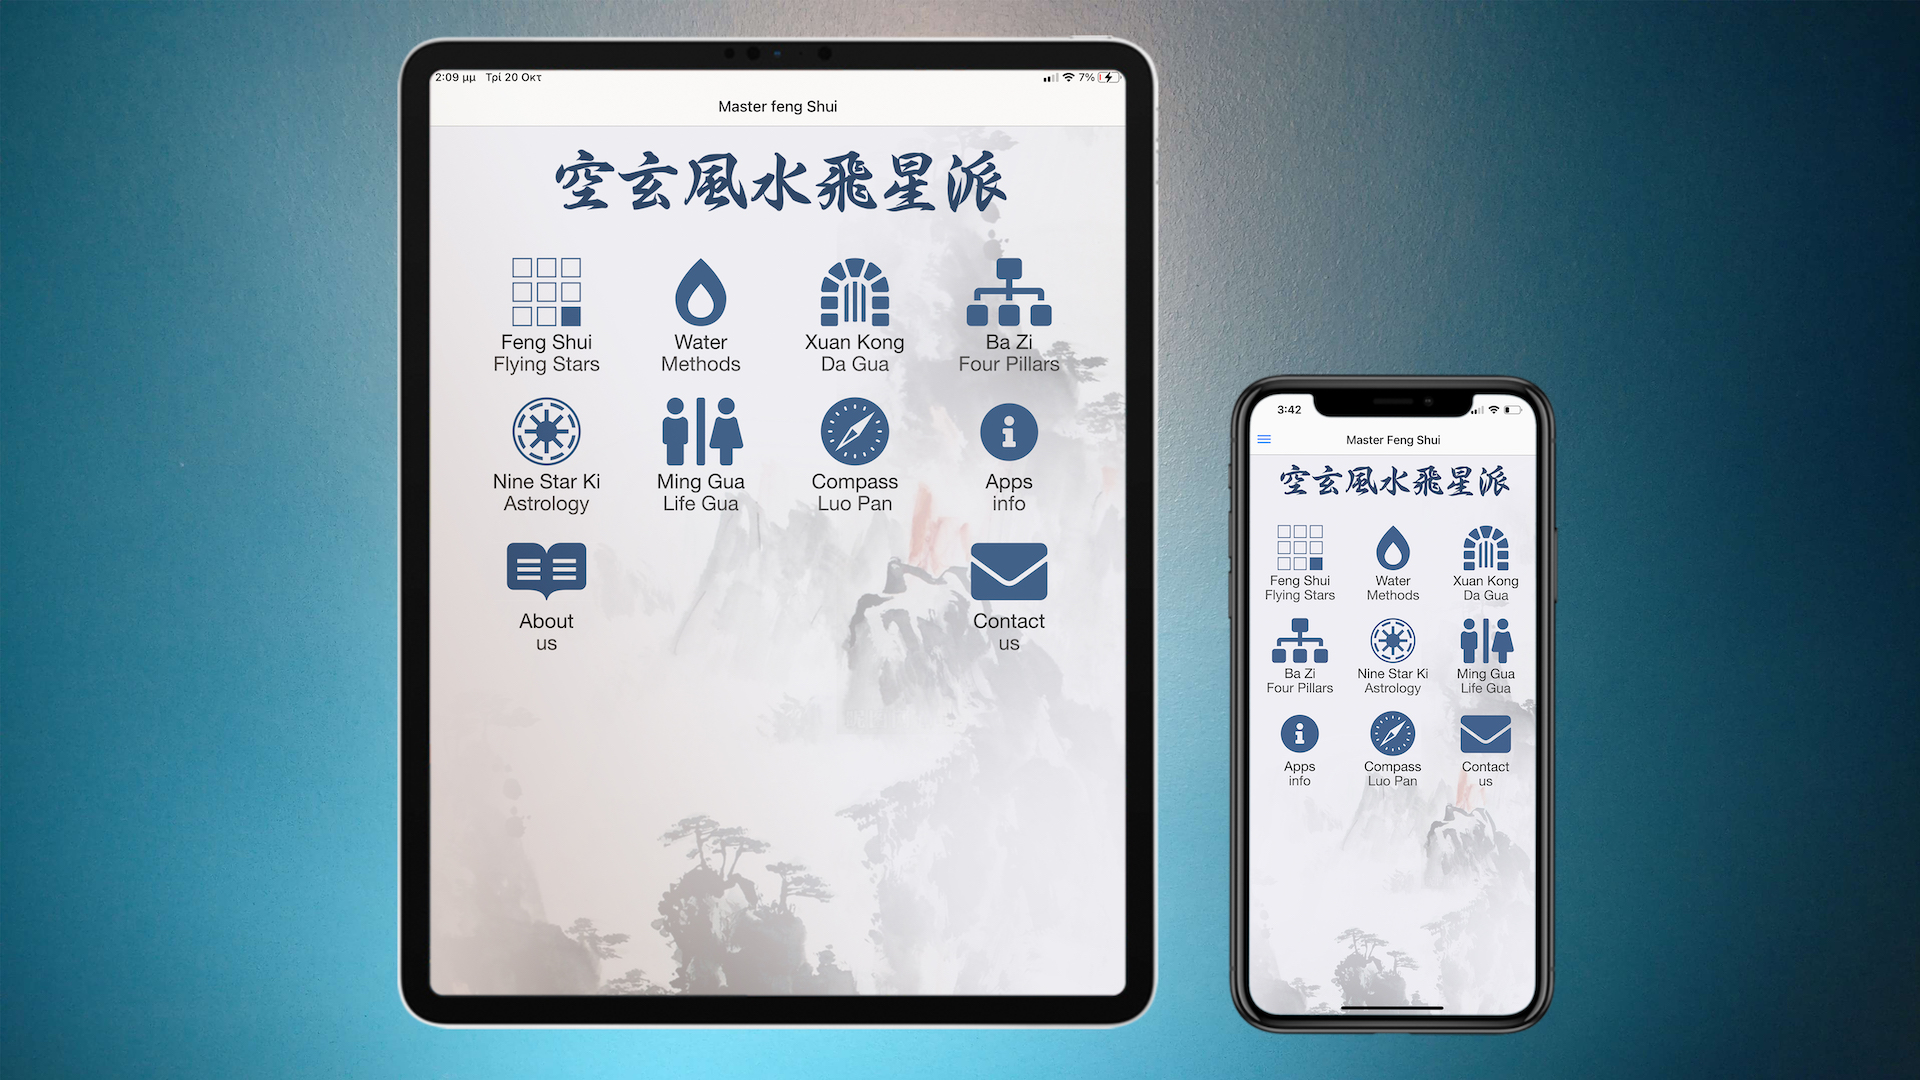 Feng Shui Master Applications for iPhone and iPad